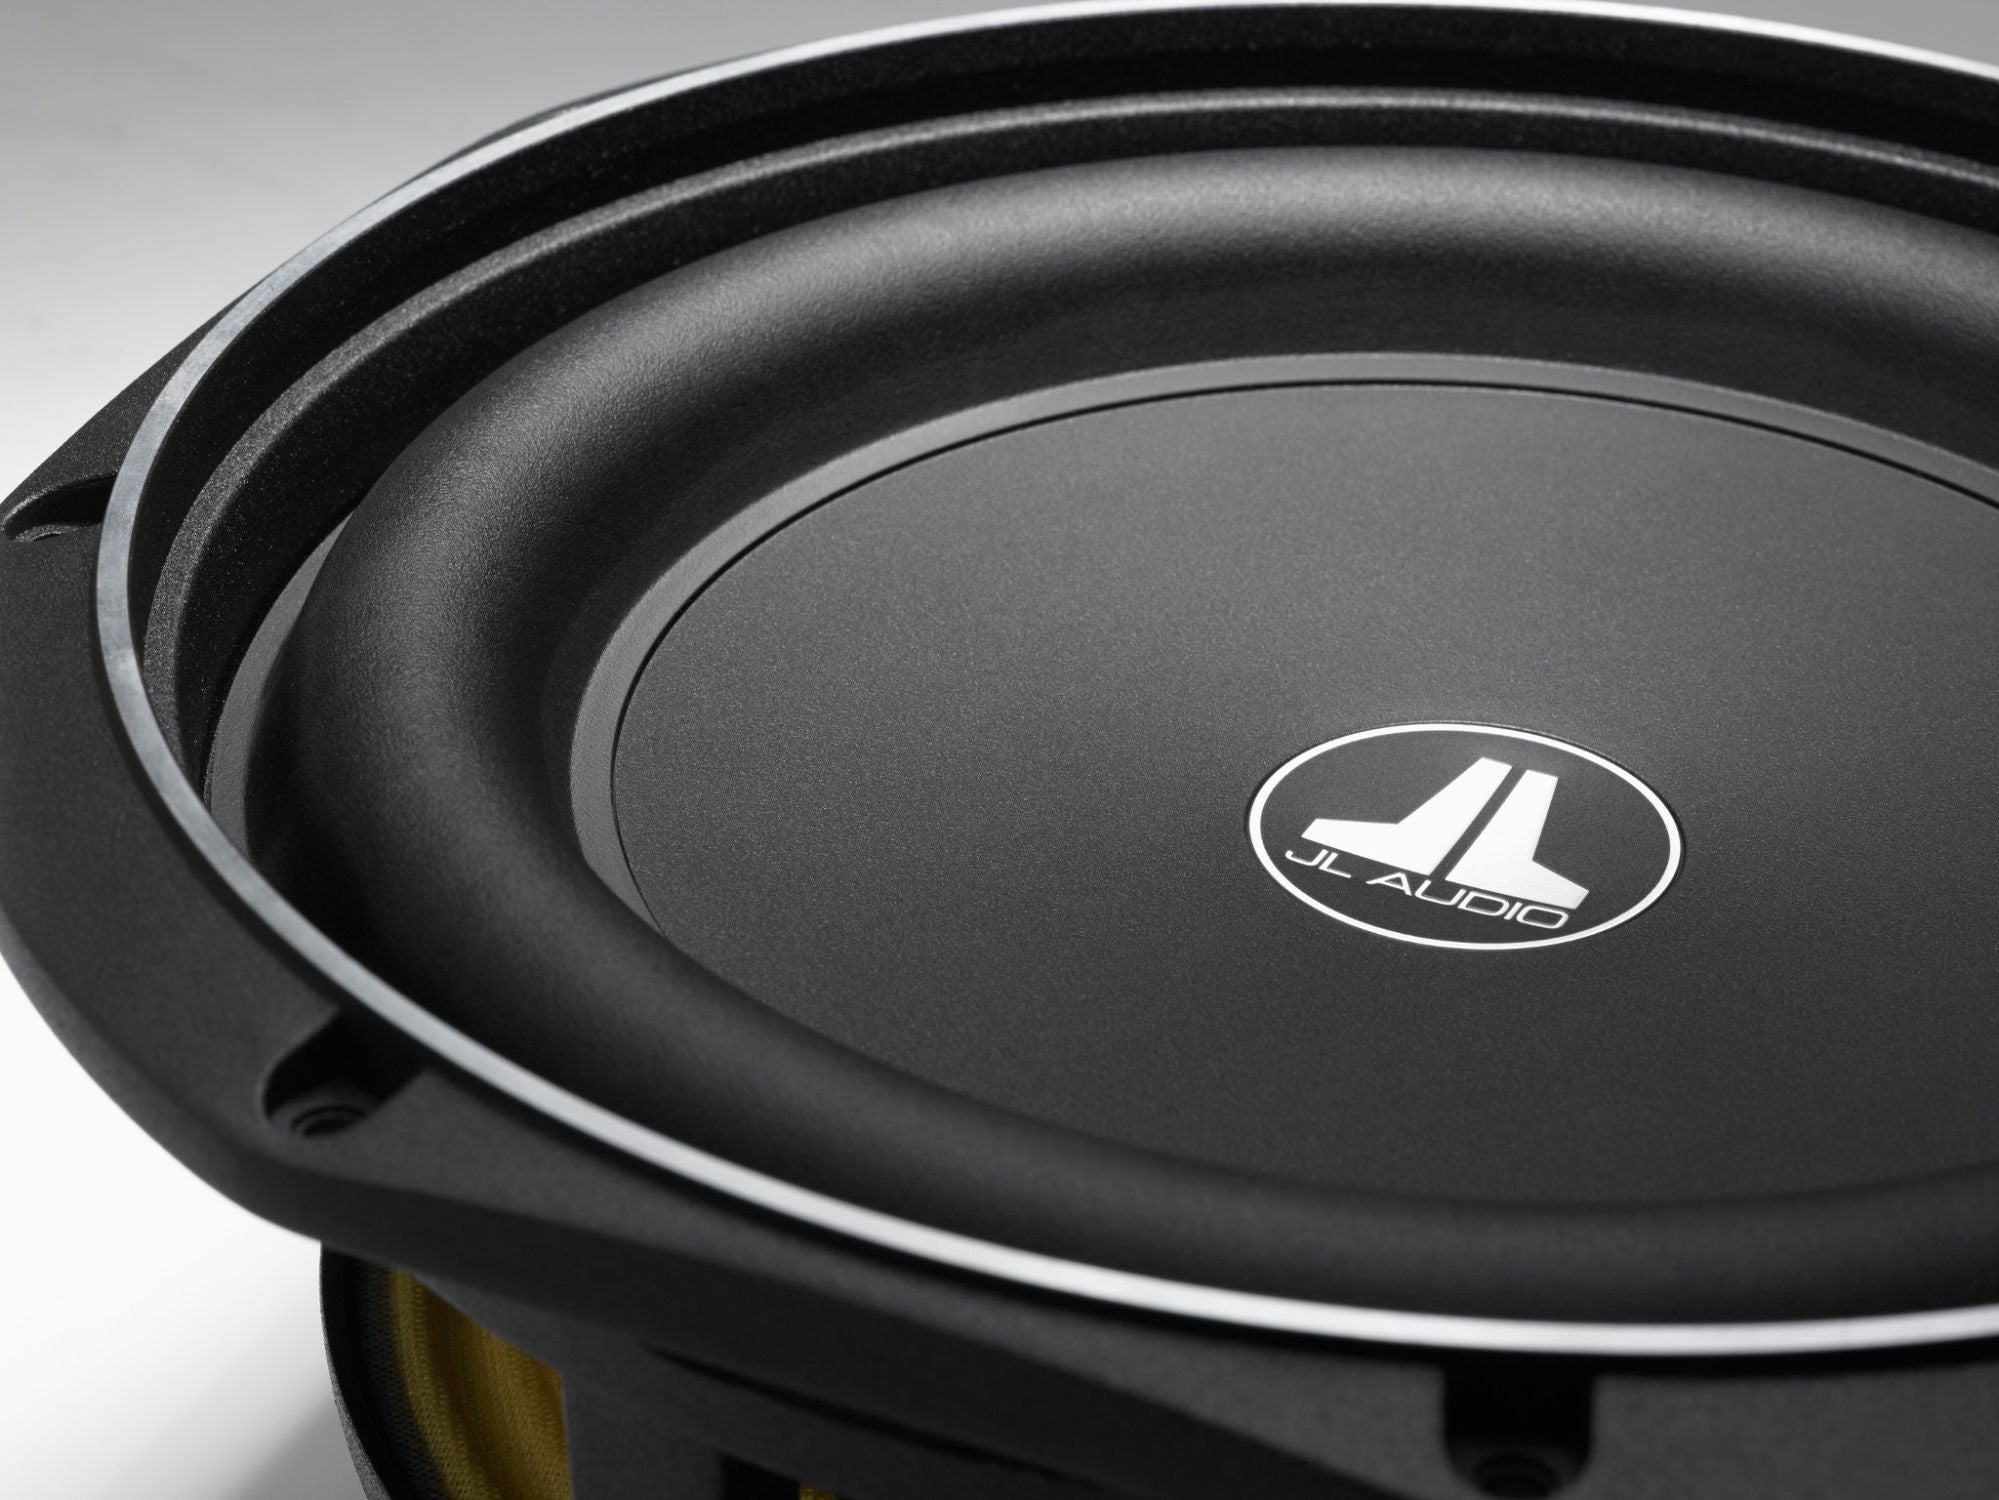 Detail of 10TW1 Subwoofer showing Frame and Surround on Right Edge